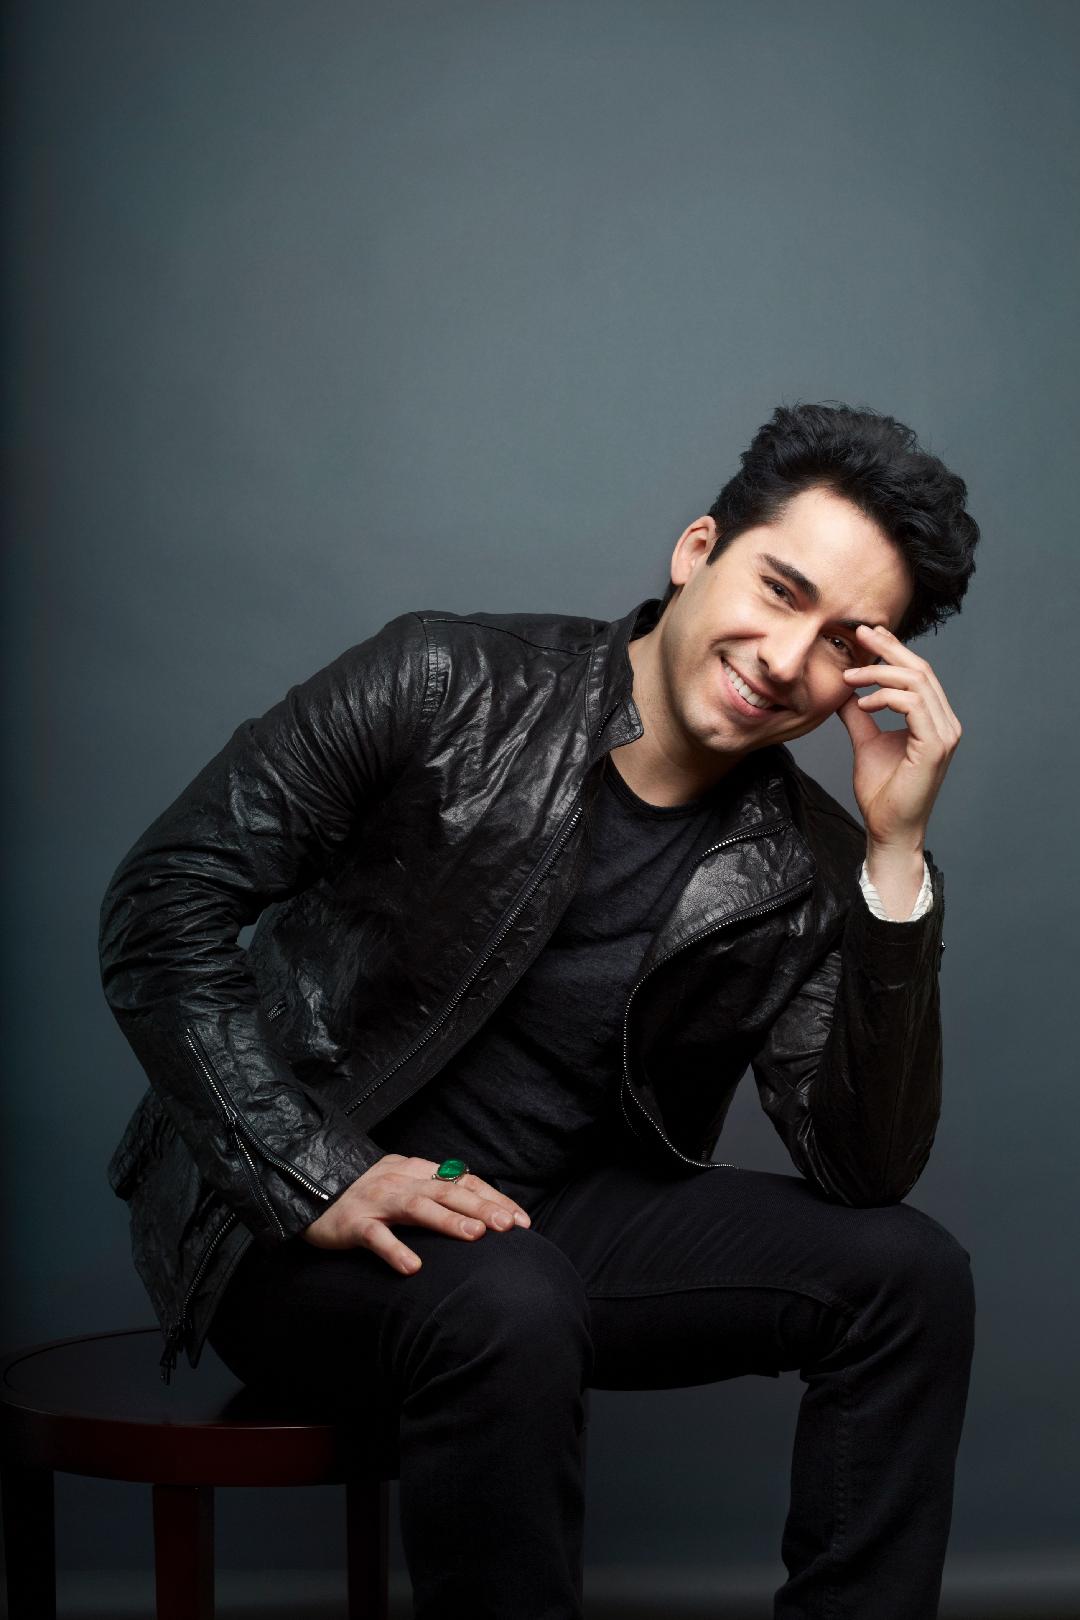 The Seventh Annual Tony Award-Winner Benefit Concert at the Maltz Jupiter Theatre on November 16, 2019 at 8 pm. features Broadway's Jersey Boy, John Lloyd Young performing classic hits from the ‘50s and ‘60s in rock'n, doo-wop and R & B standards. 